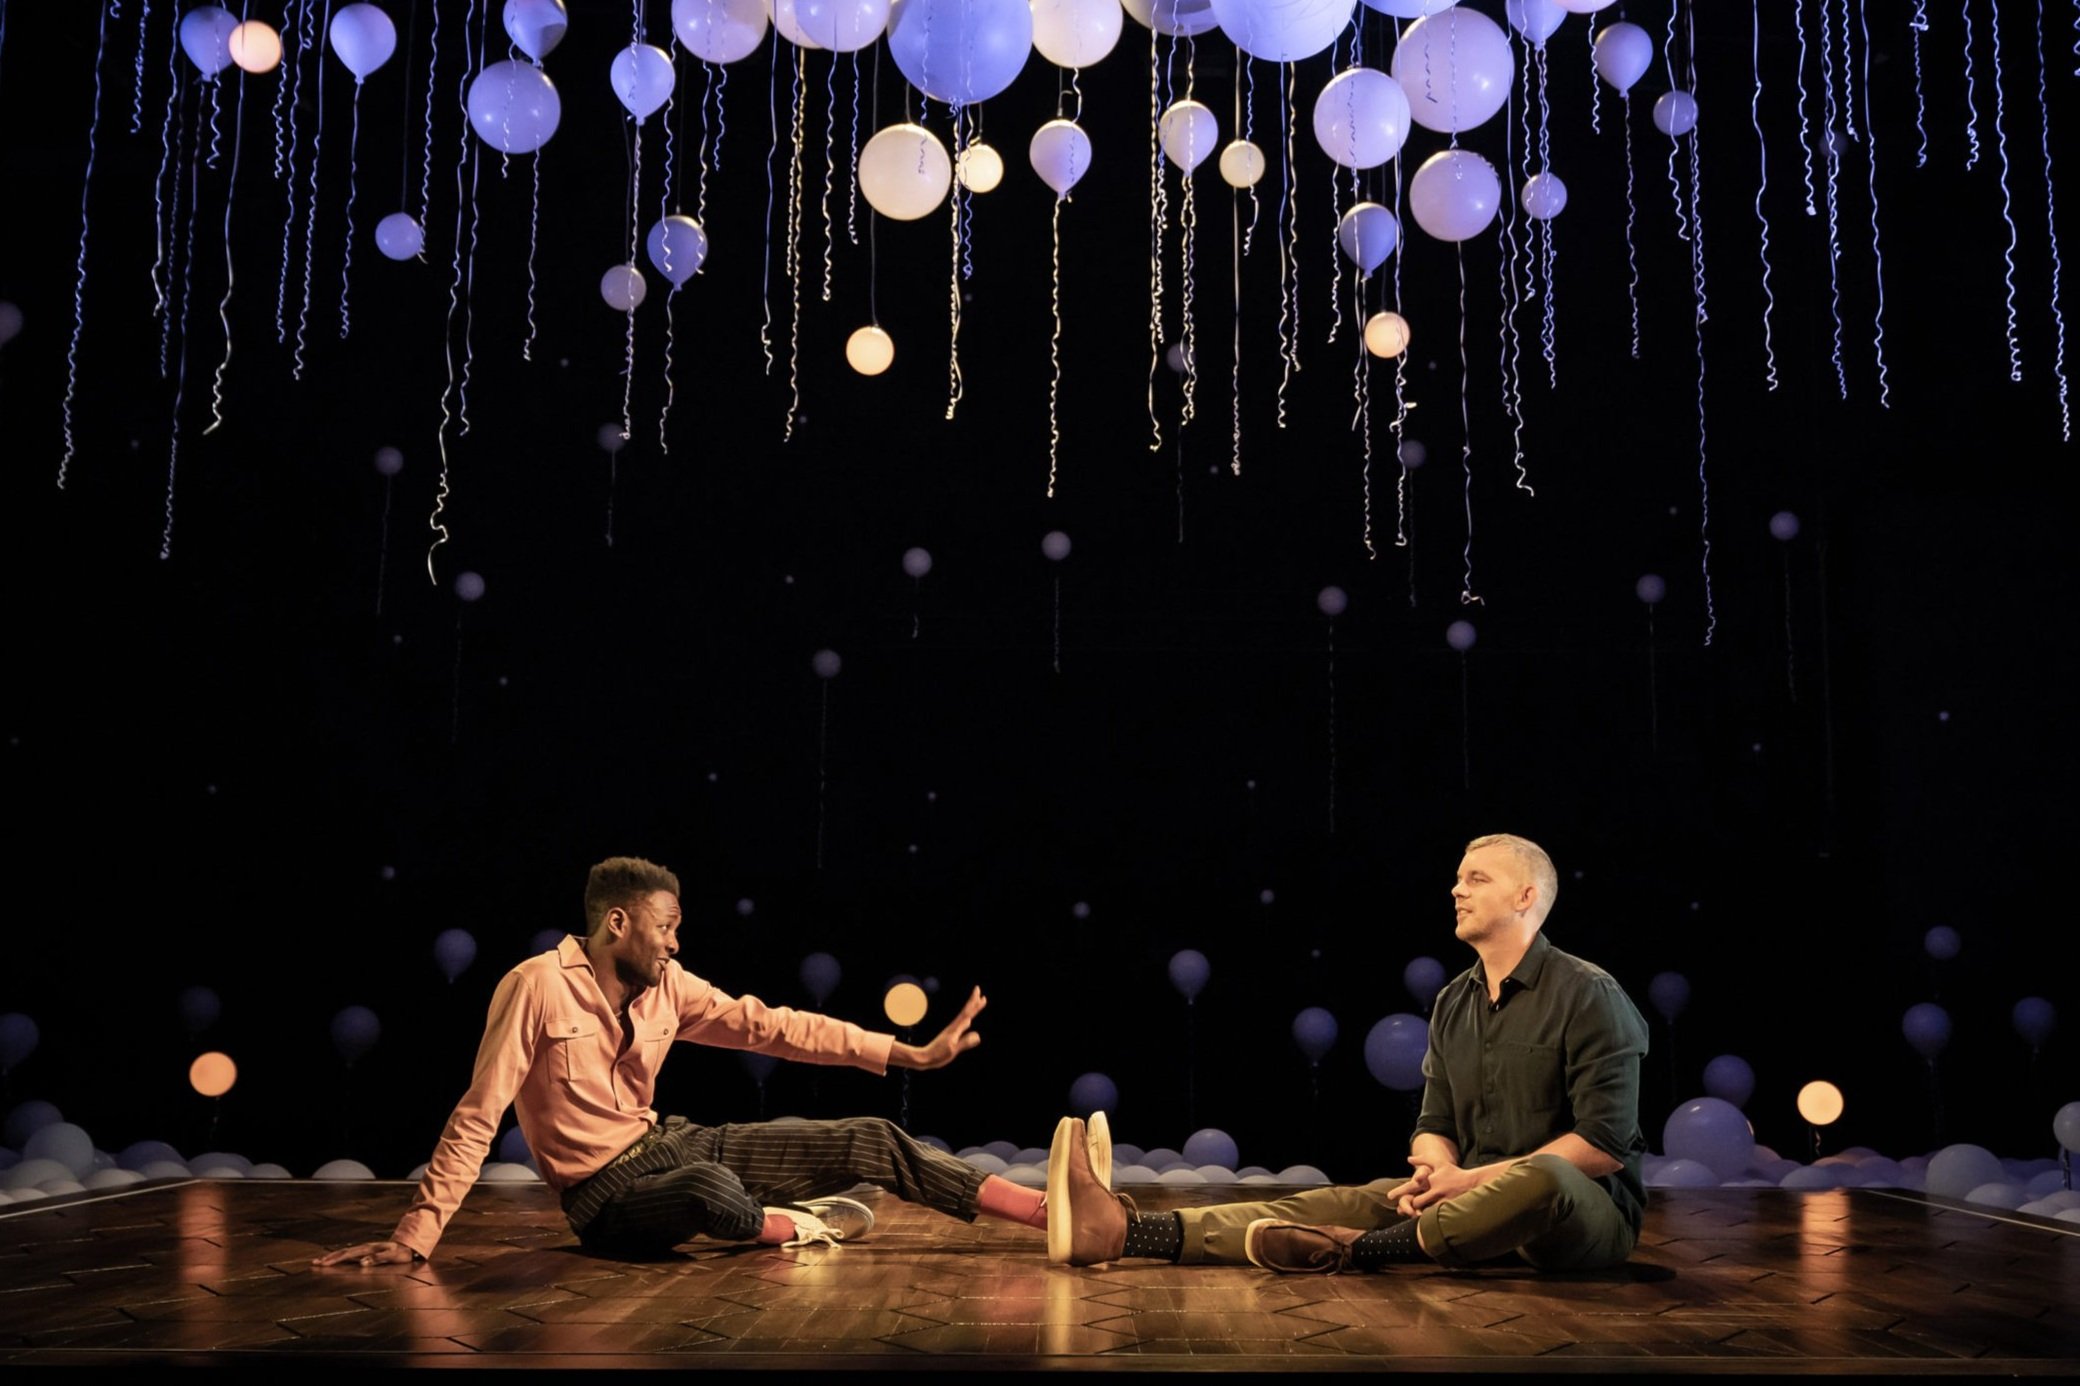 Omari-Douglas-and-Russell-Tovey-in-CONSTELLATIONS.-Directed-by-Michael-Longhurst.-Photo-by-Marc-Brenner-1136-scaled.jpg